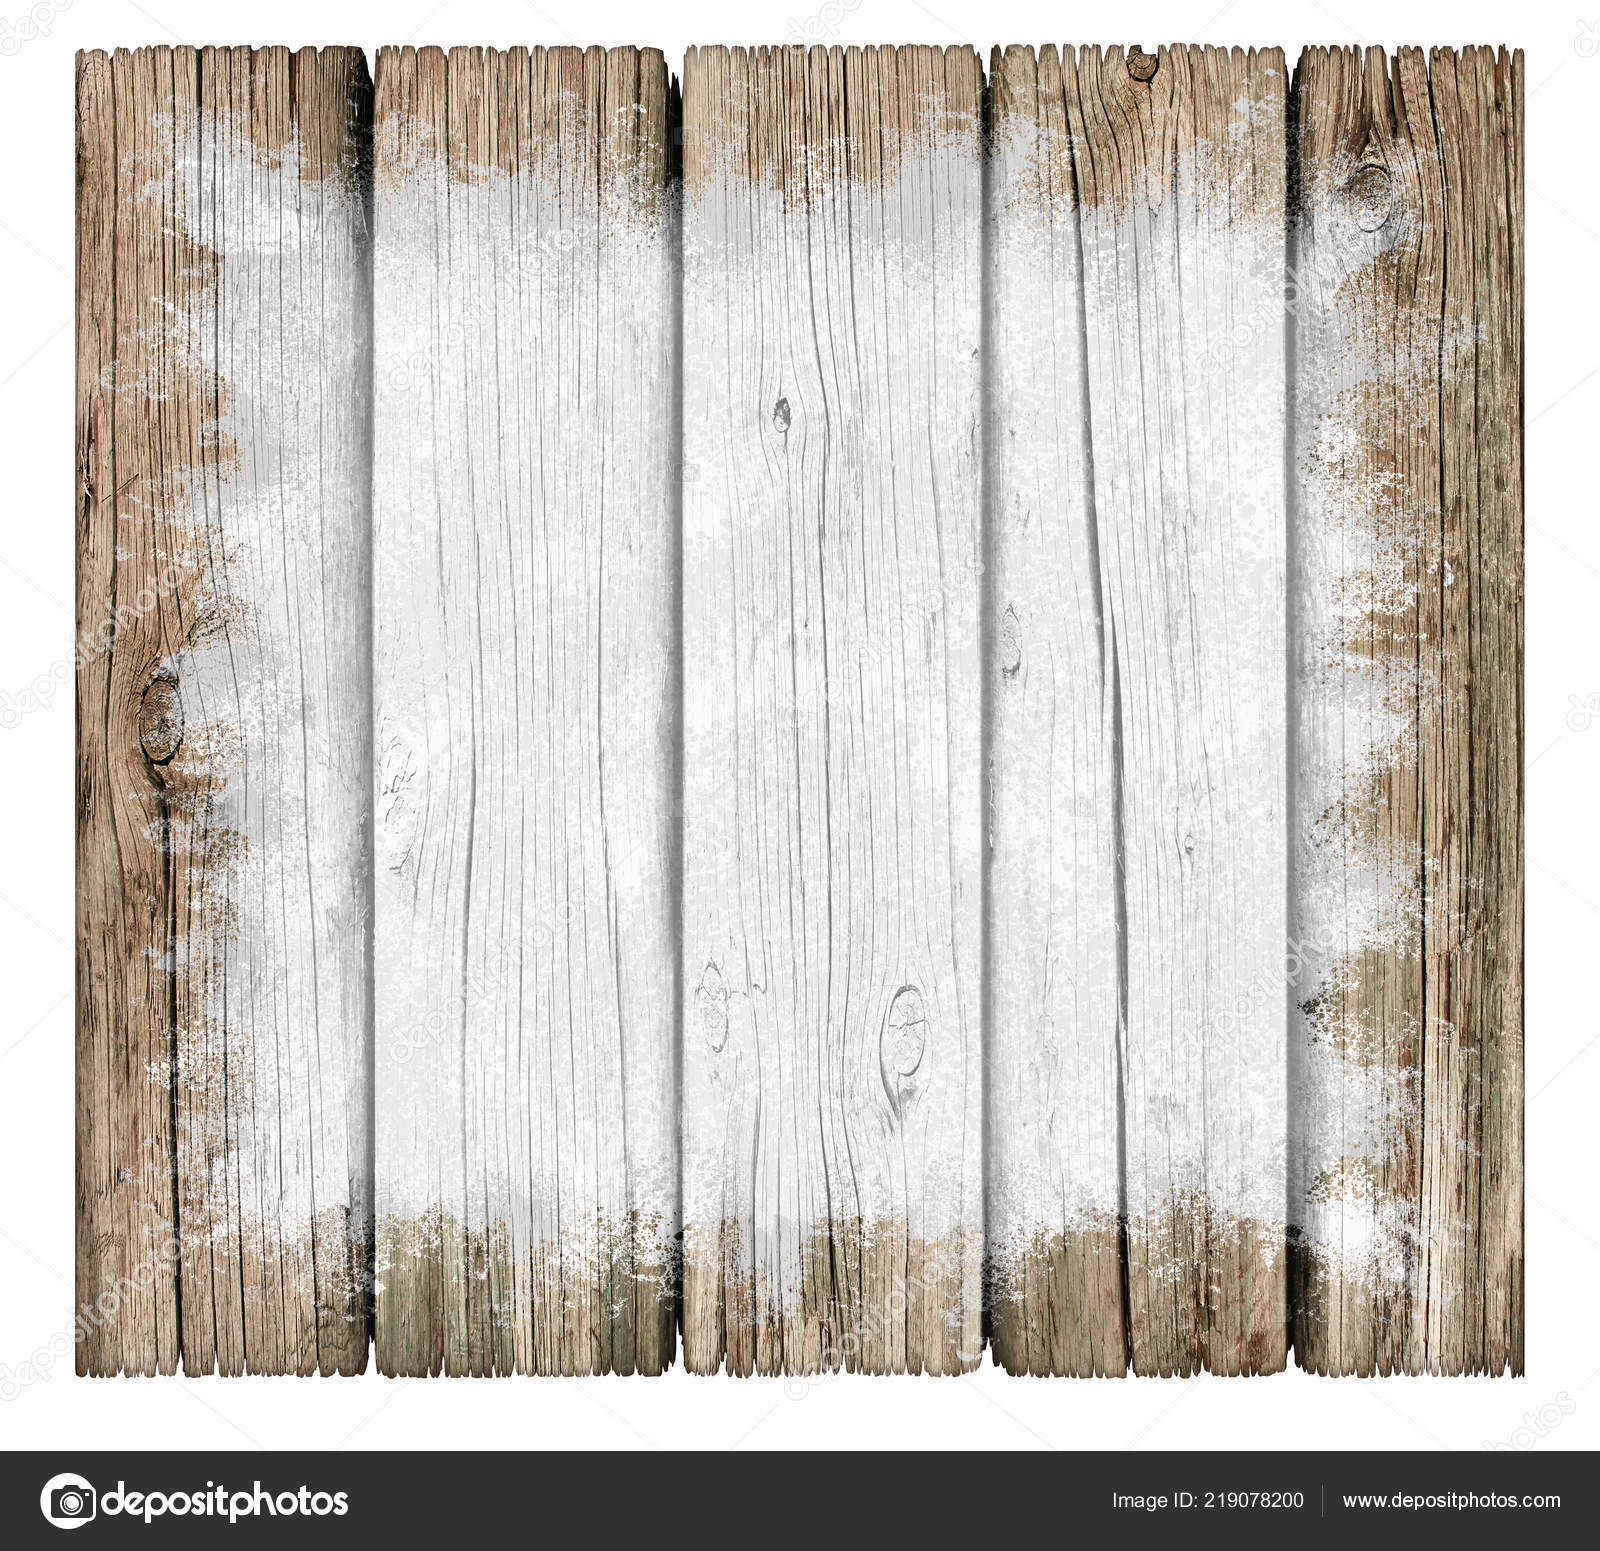 Rustic Wood Painted Sign Background Old Weathered Texture Grunge ...